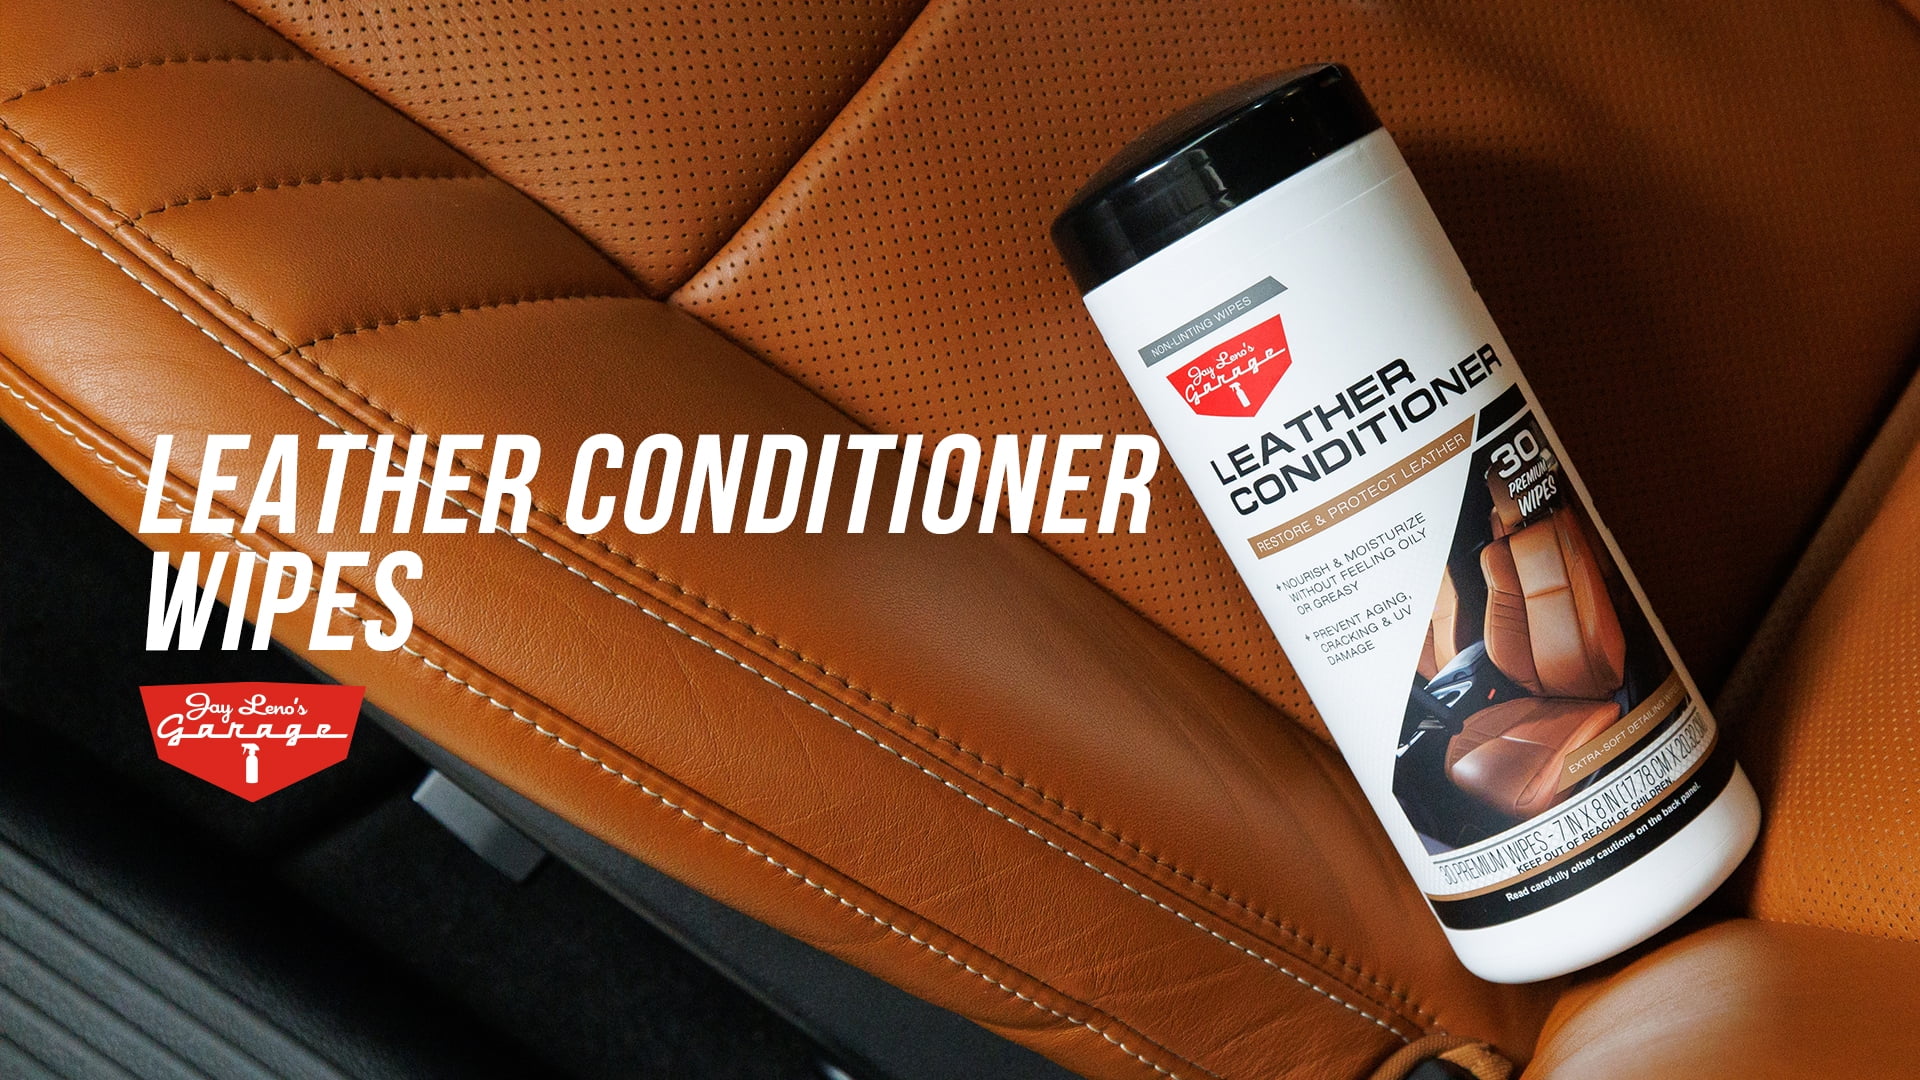 Jay Leno's Garage Leather Conditioner - 30 Each